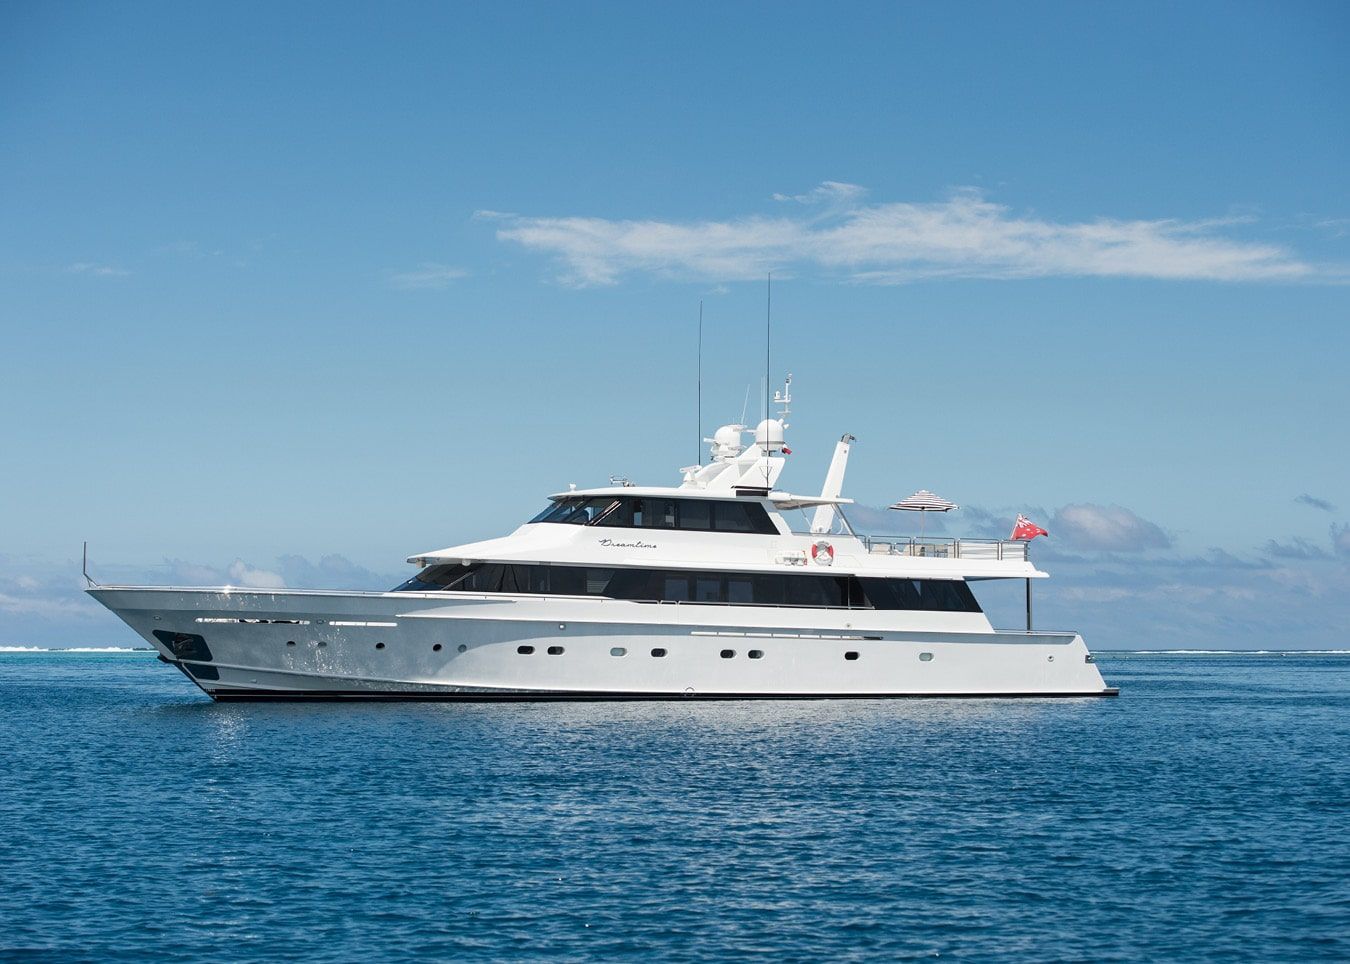 DREAMTIME | From $2,200 Per Hour | 45 Guests